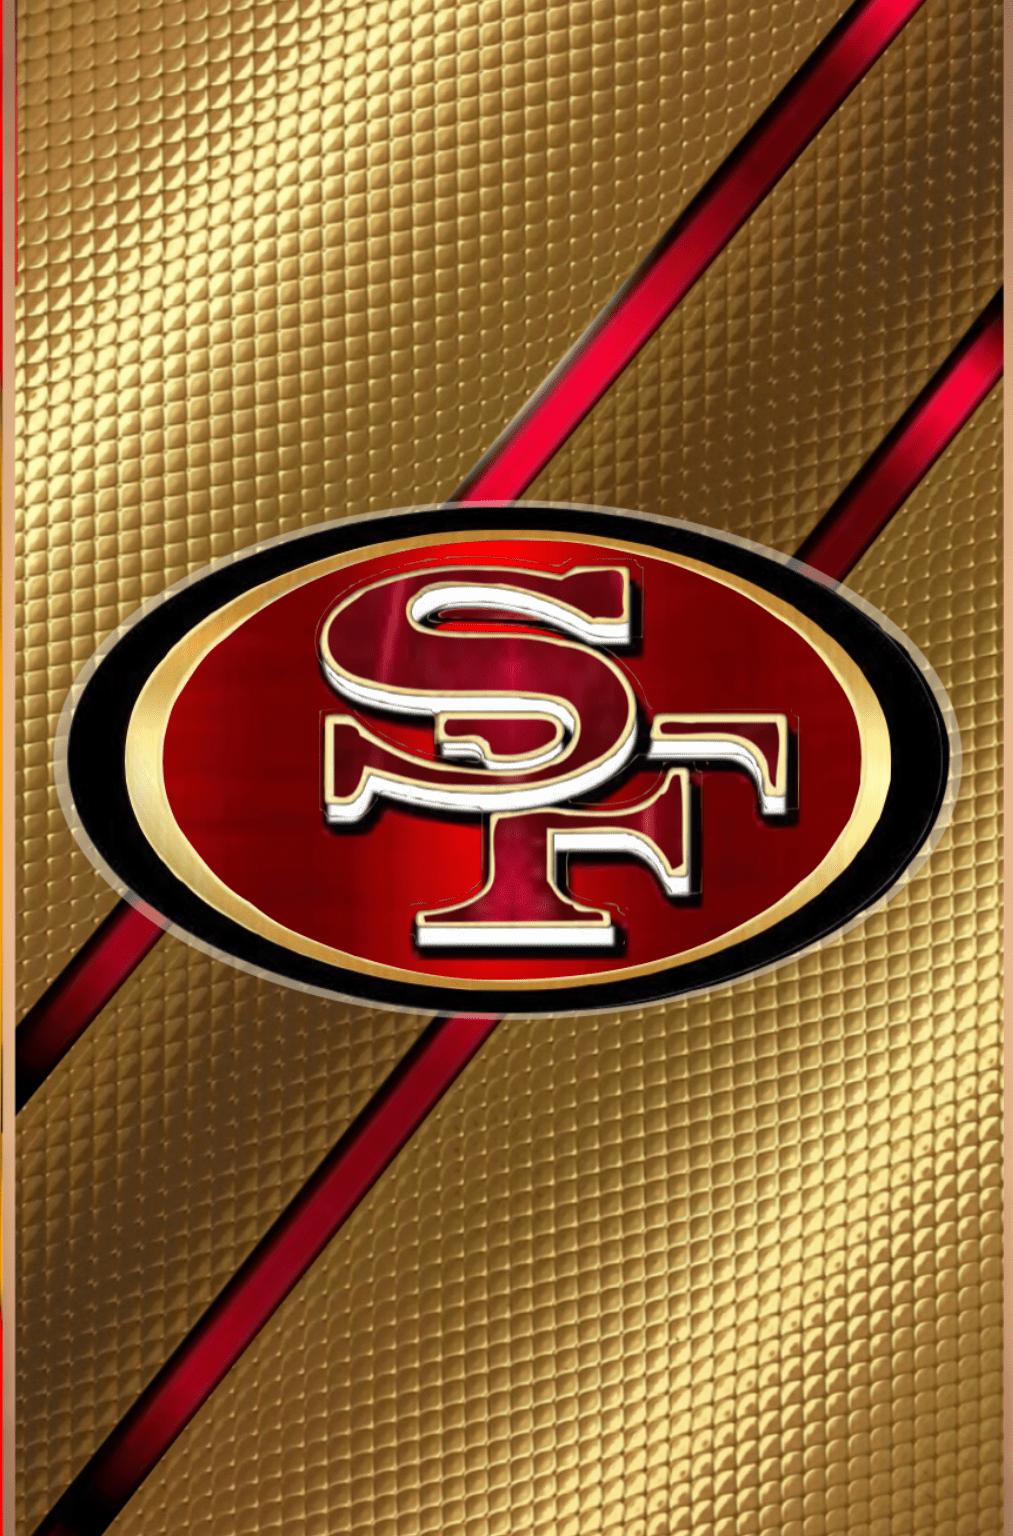 Sf 49ers Wallpaper 100% Quality, Save